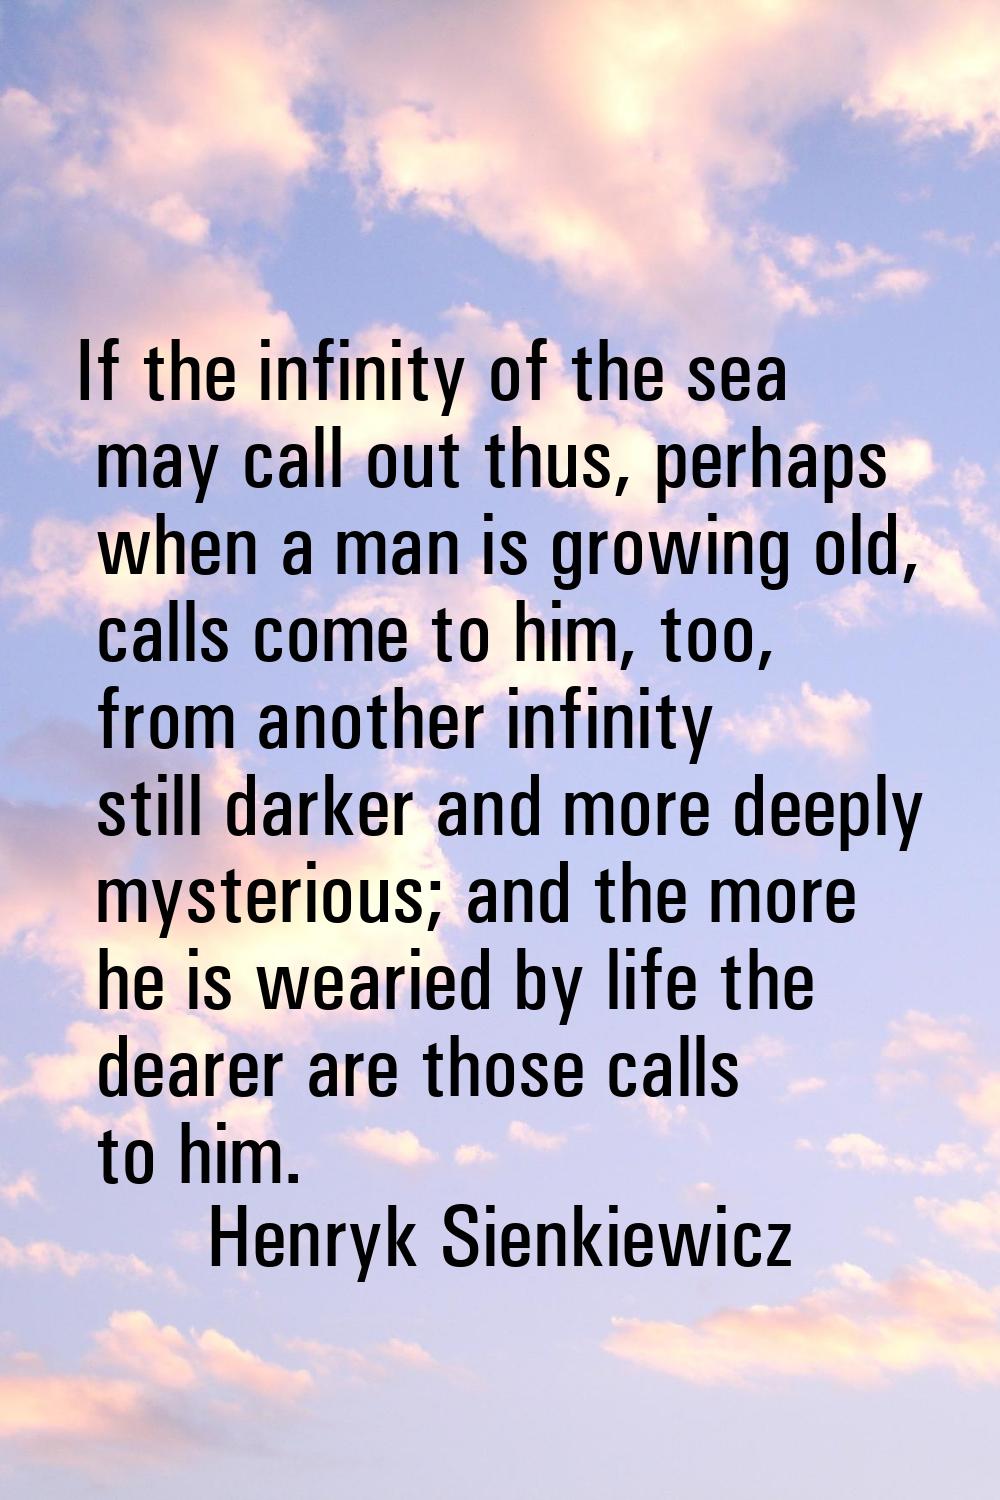 If the infinity of the sea may call out thus, perhaps when a man is growing old, calls come to him,